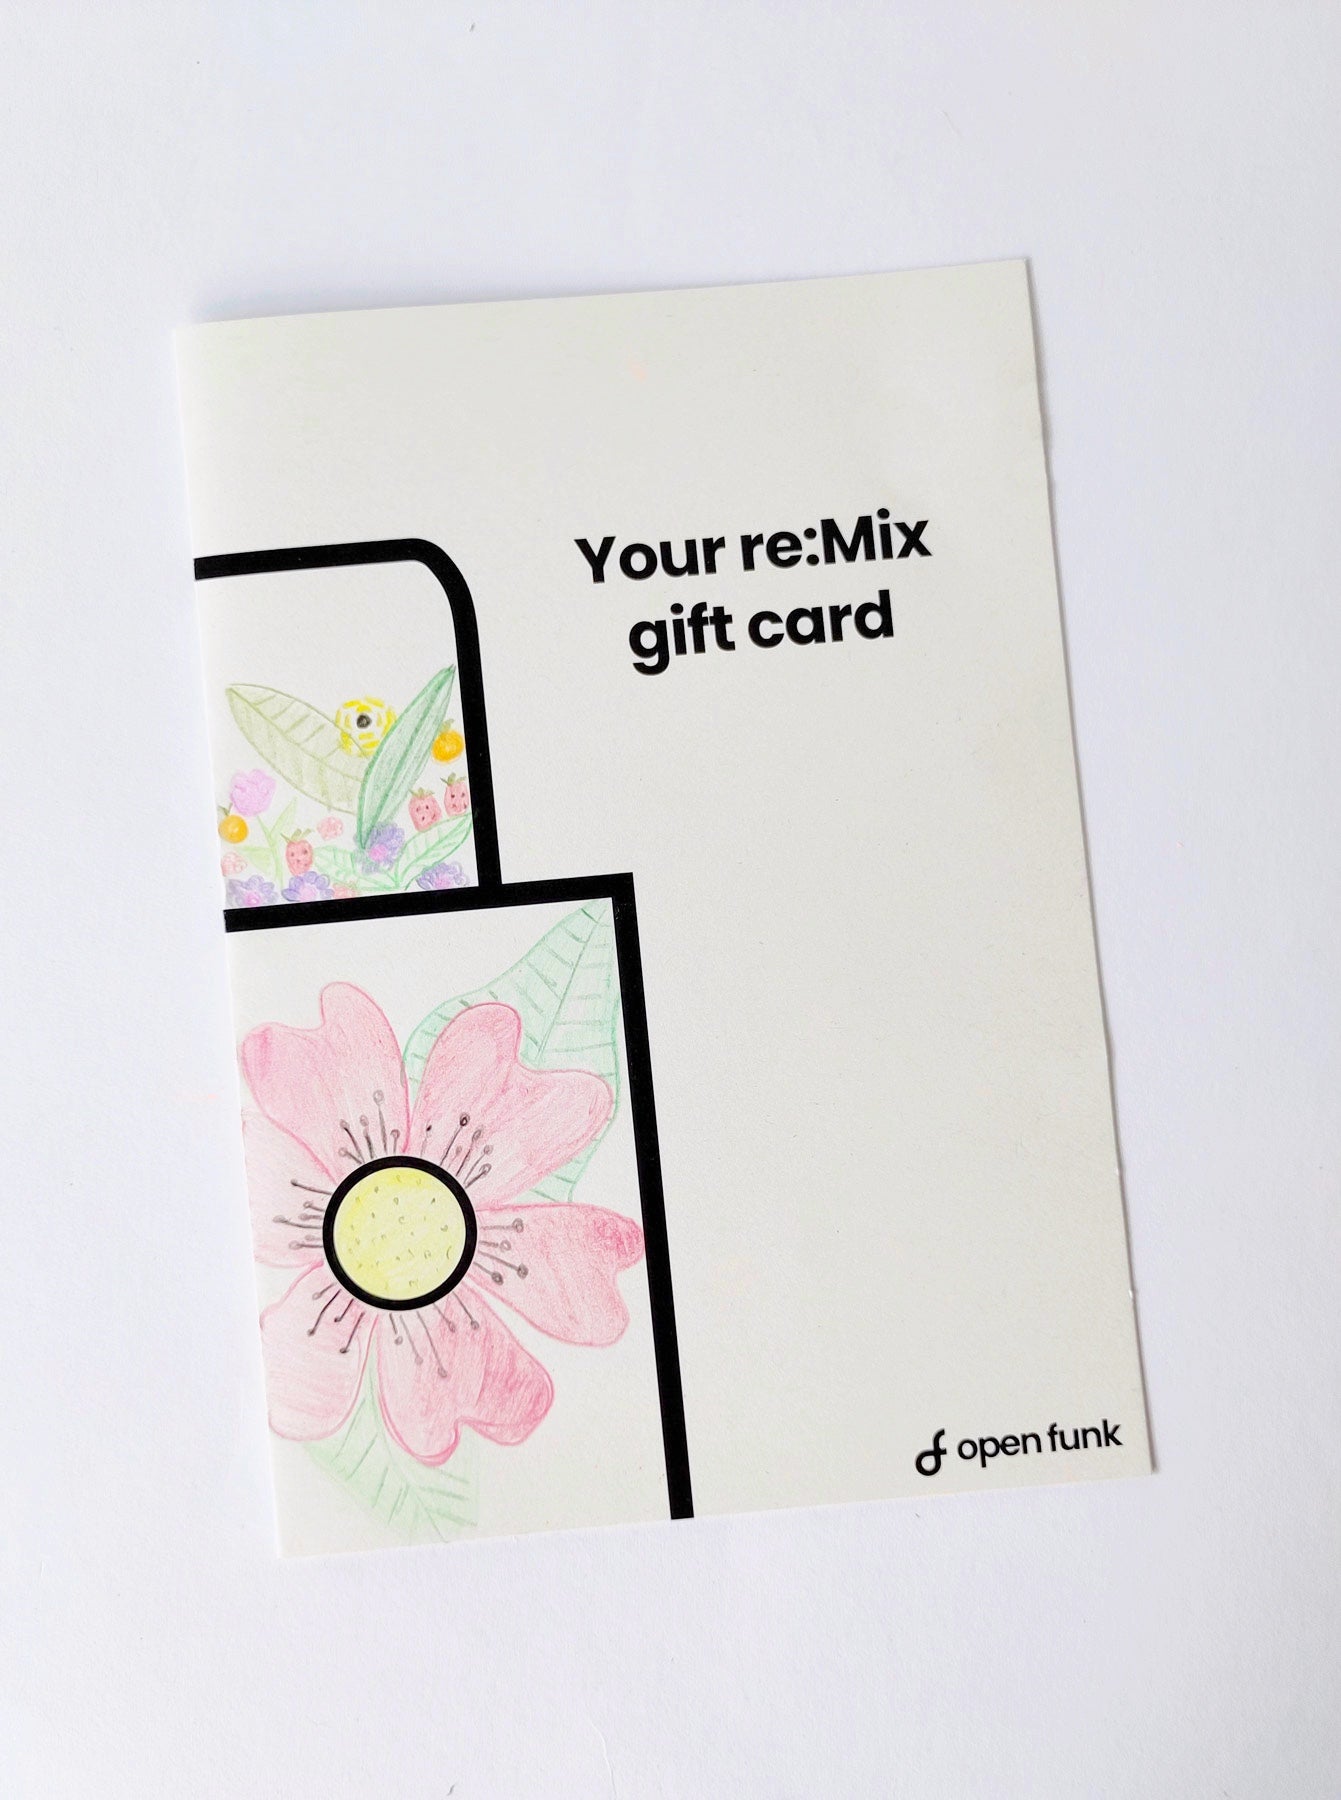 Myntra Gift Cards by Payal Vats on Dribbble